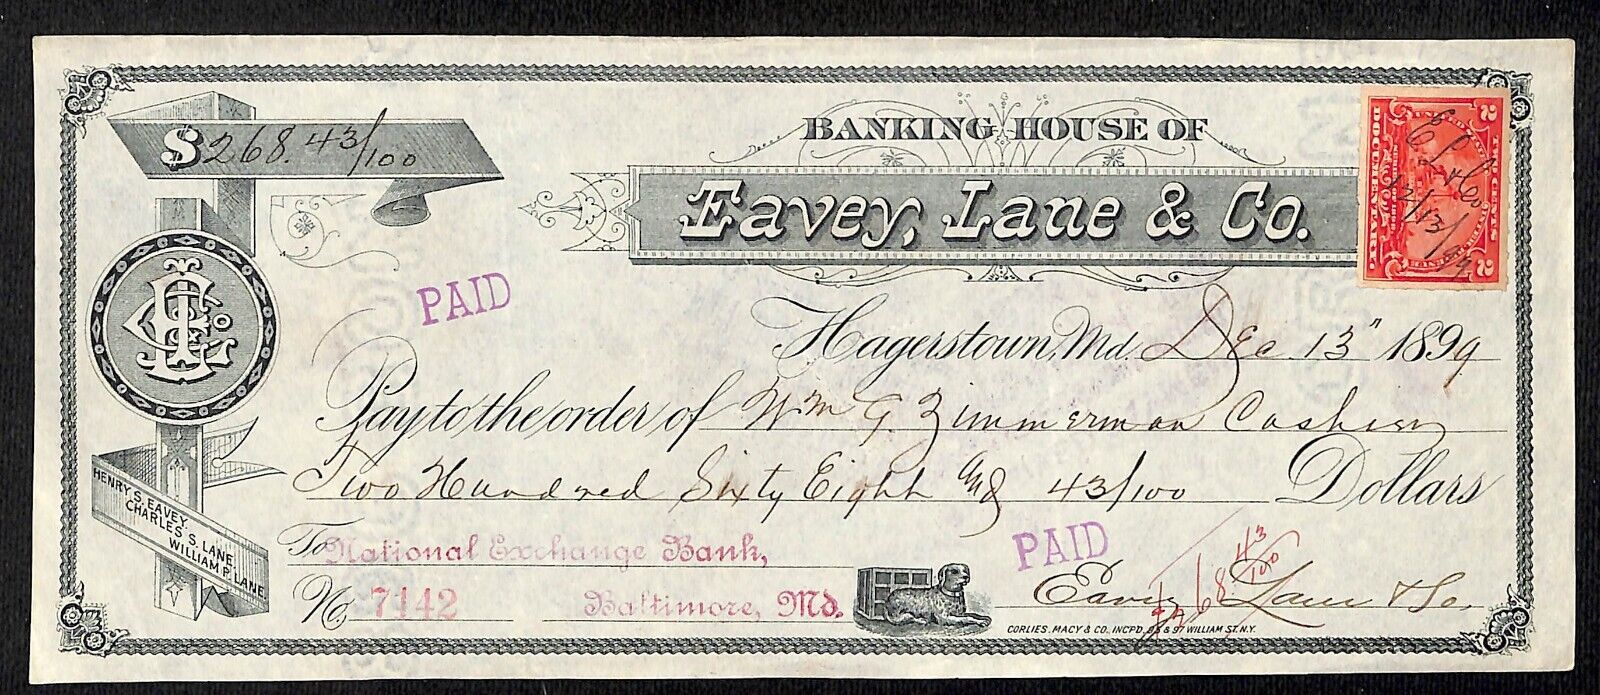 Banking House of Eavey, Lane & Co. Hagerstown, MD 1899 Bank Check w/ Tax Stamp